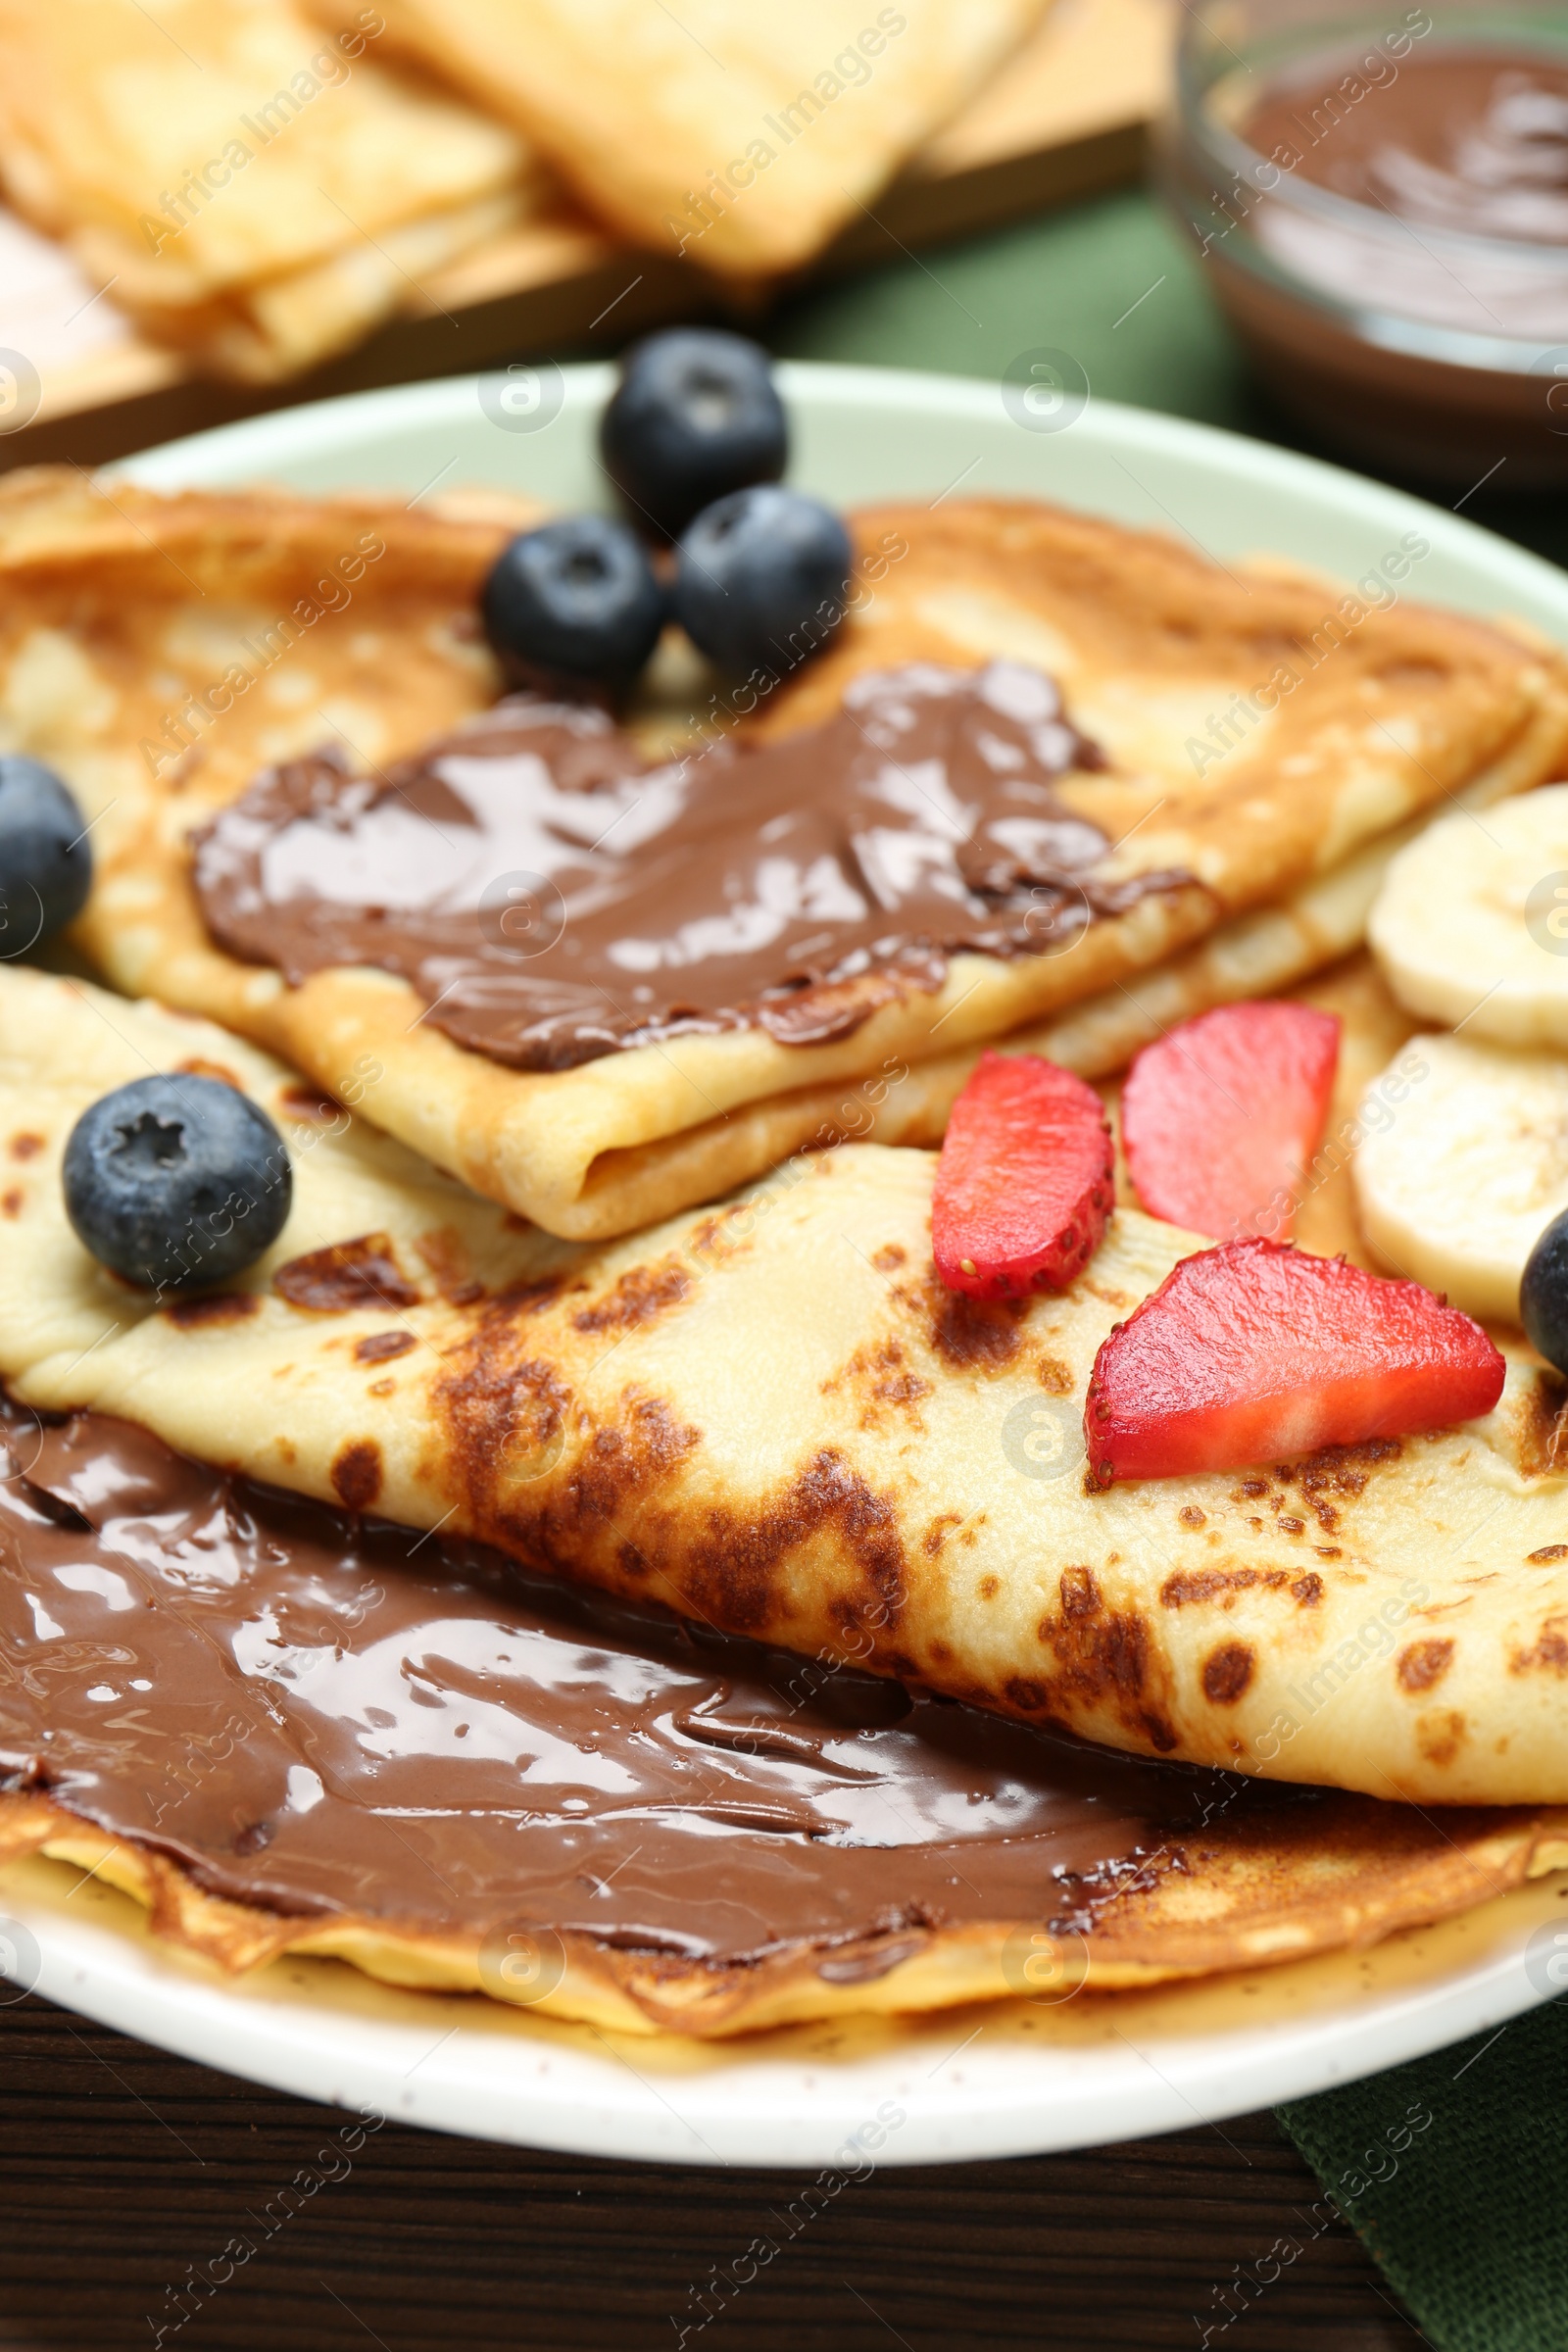 Photo of Tasty crepes with chocolate paste, banana and berries on table, closeup